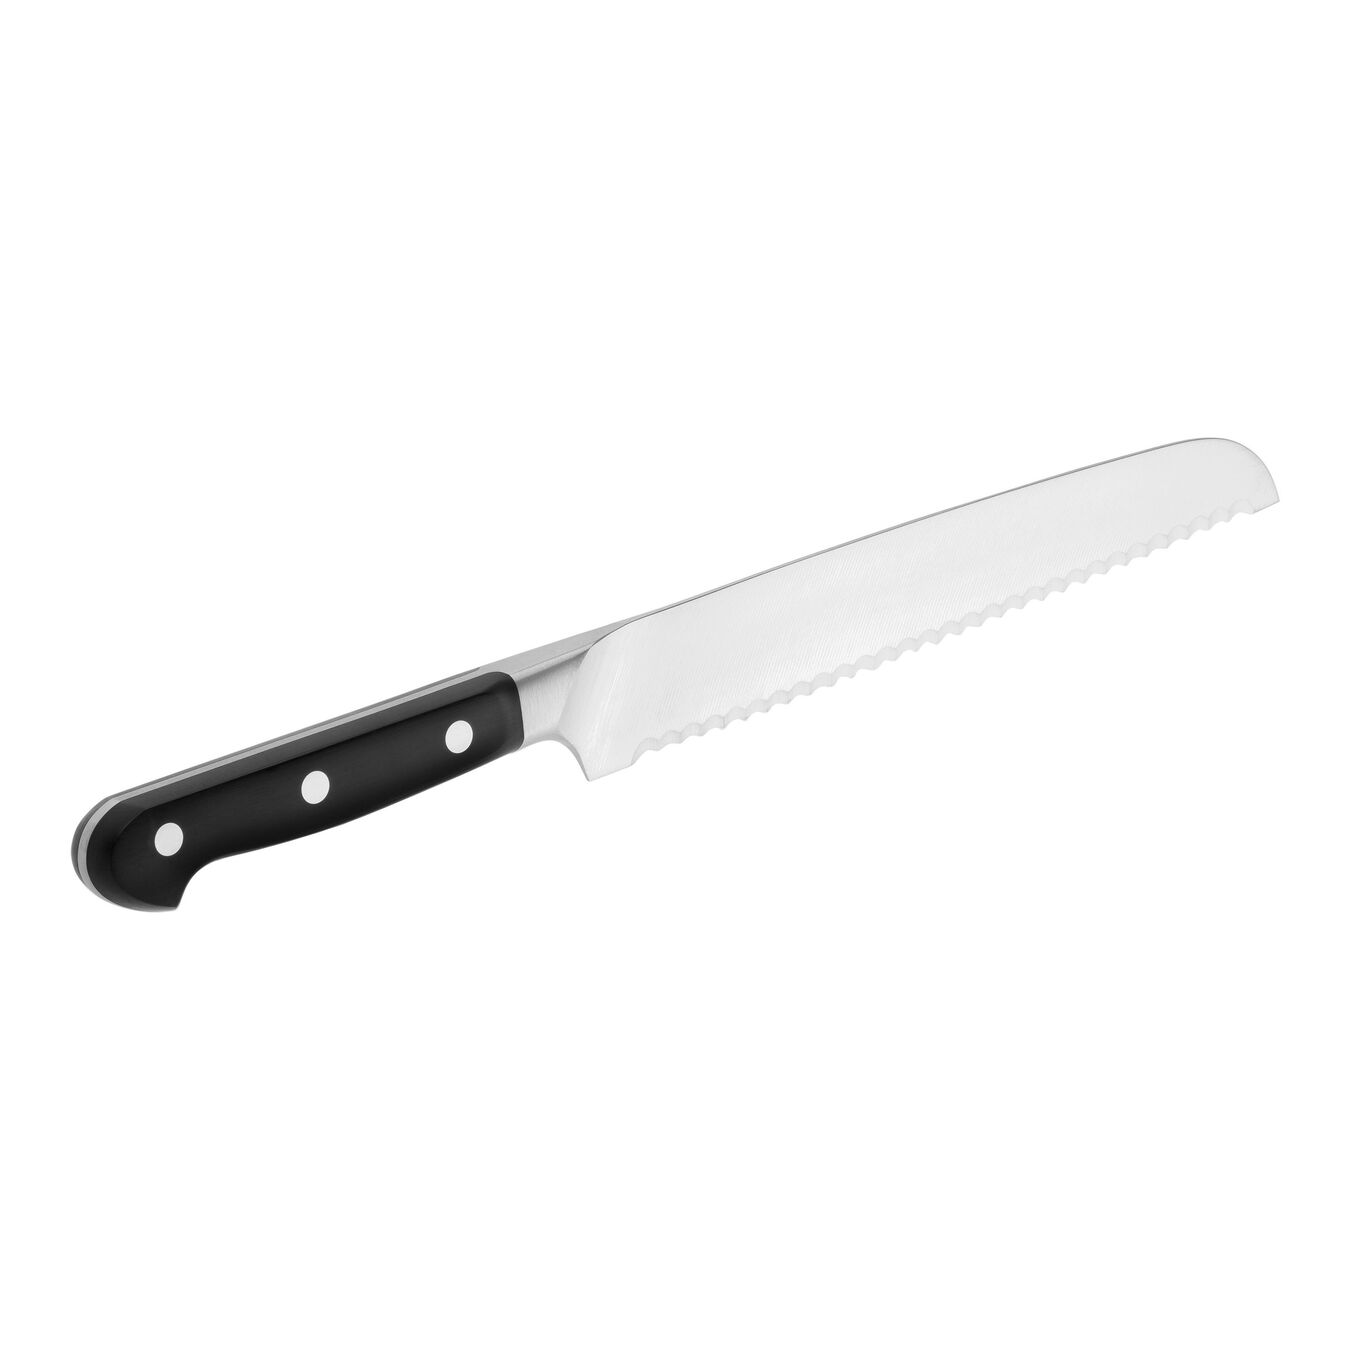 8 inch Bread knife - Visual Imperfections,,large 2